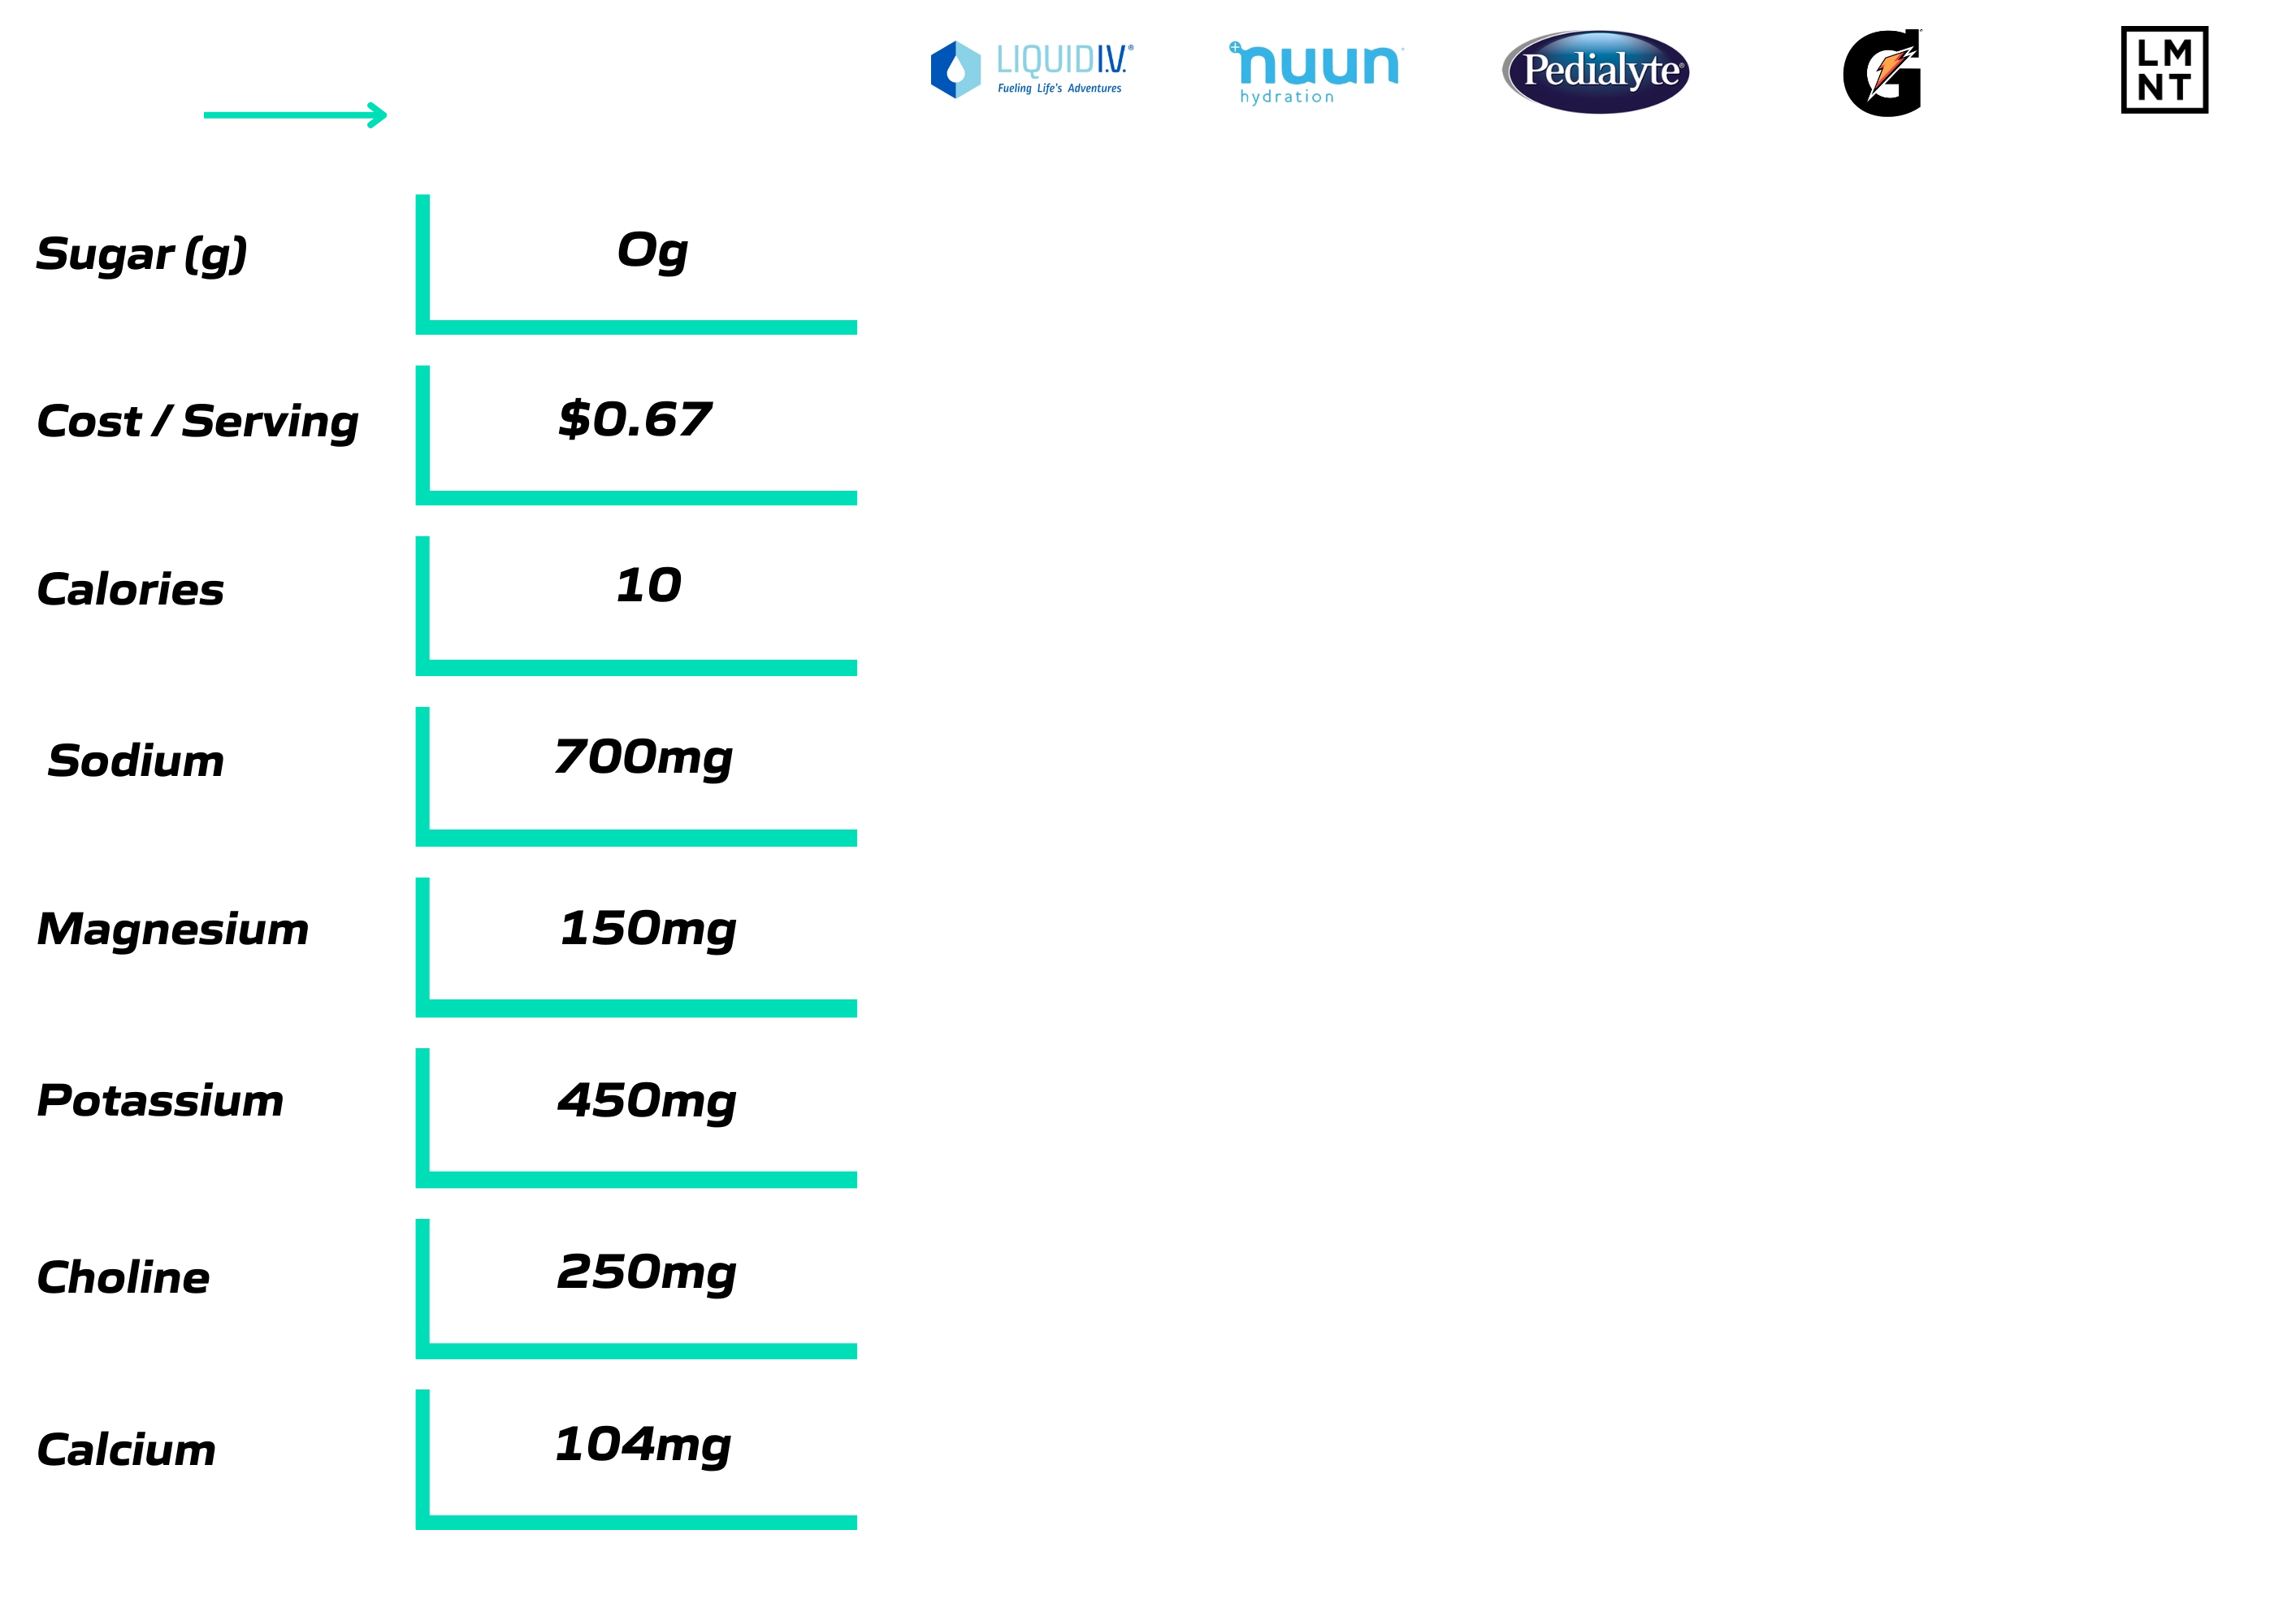 Comparative chart comparing Range Fit to other electrolytes.